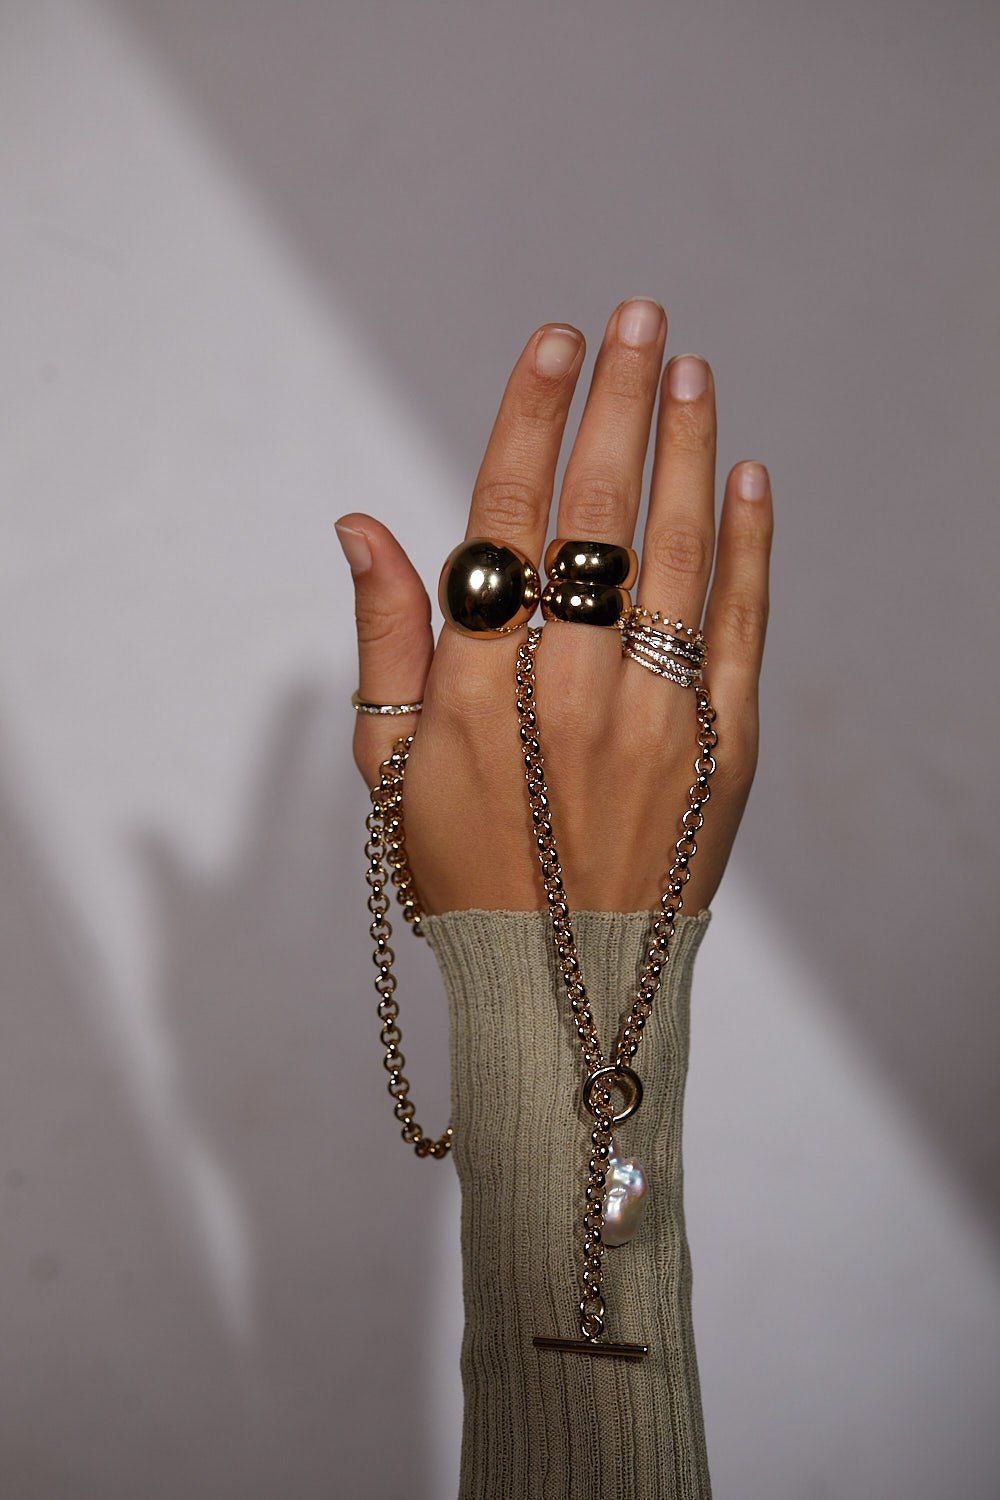 a woman's hand with a chain and ring on it